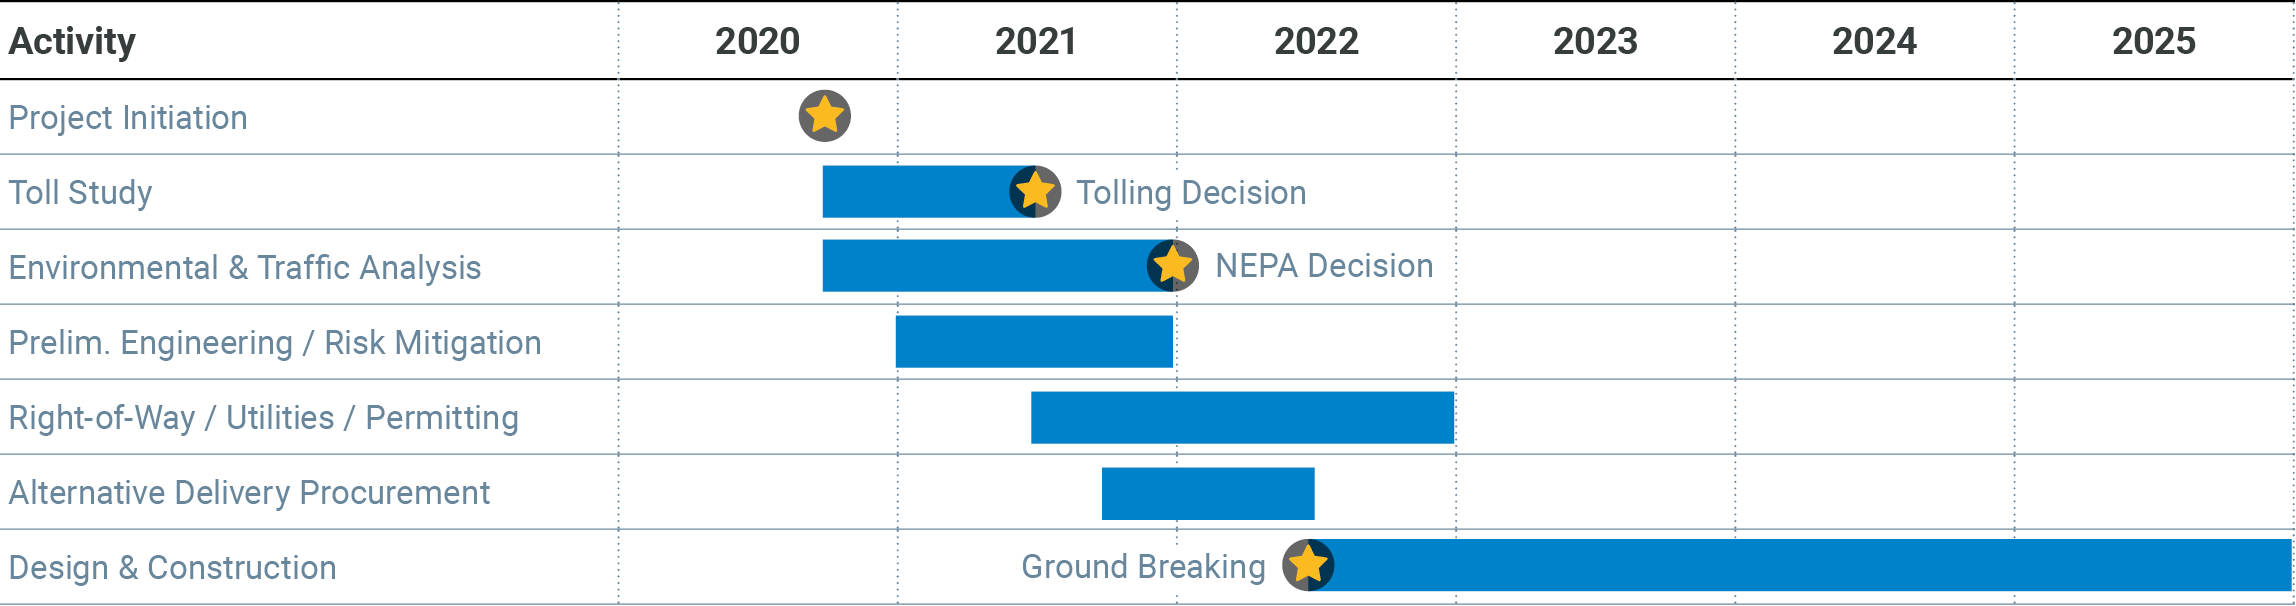 69 Express Project projected timeline 2020 to 2025